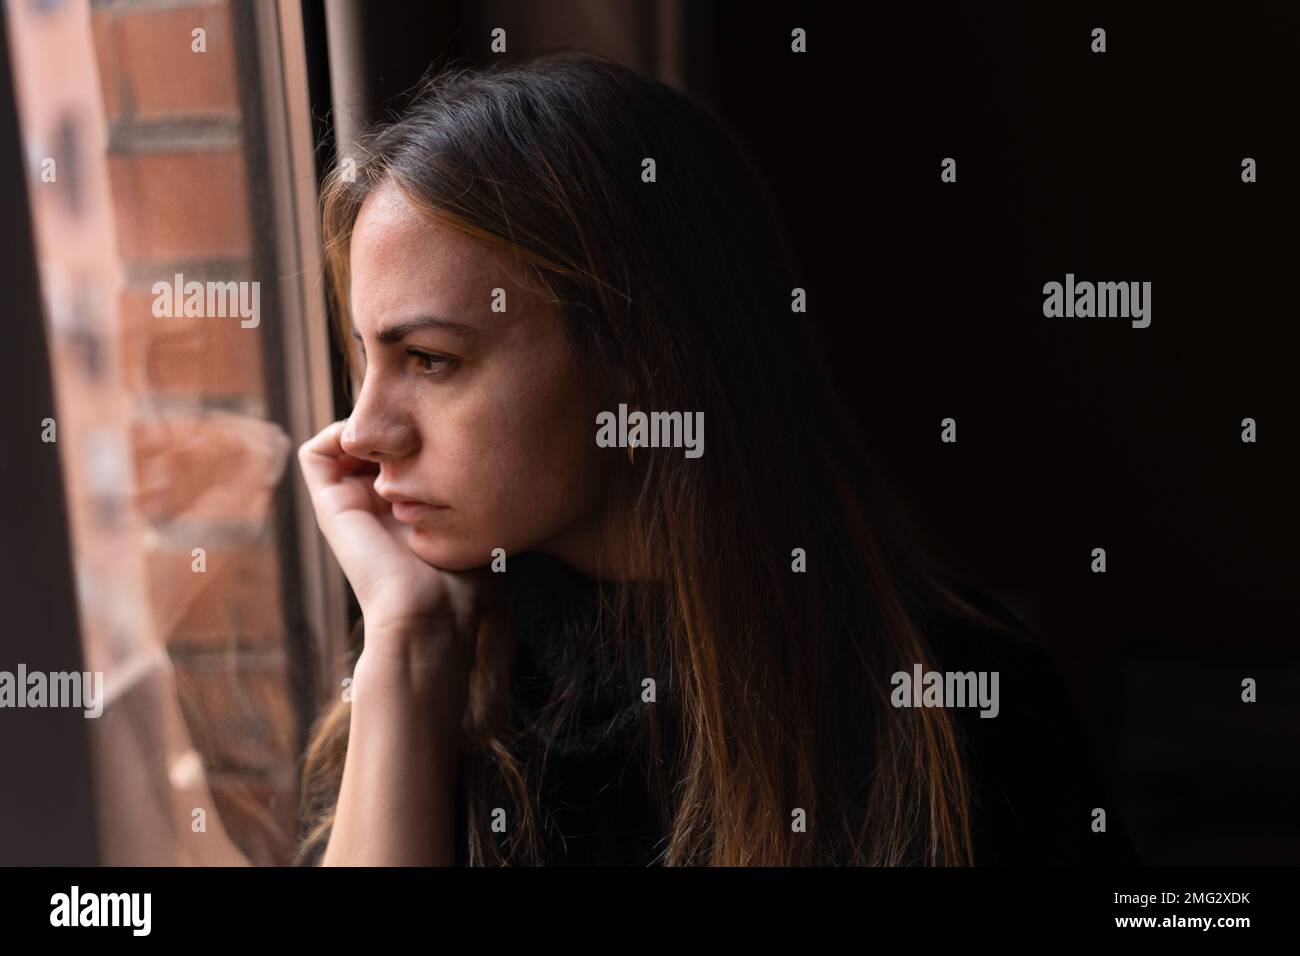 Side view of young thoughtful female with long dark hair leaning chin on hand and looking out window at home Stock Photo